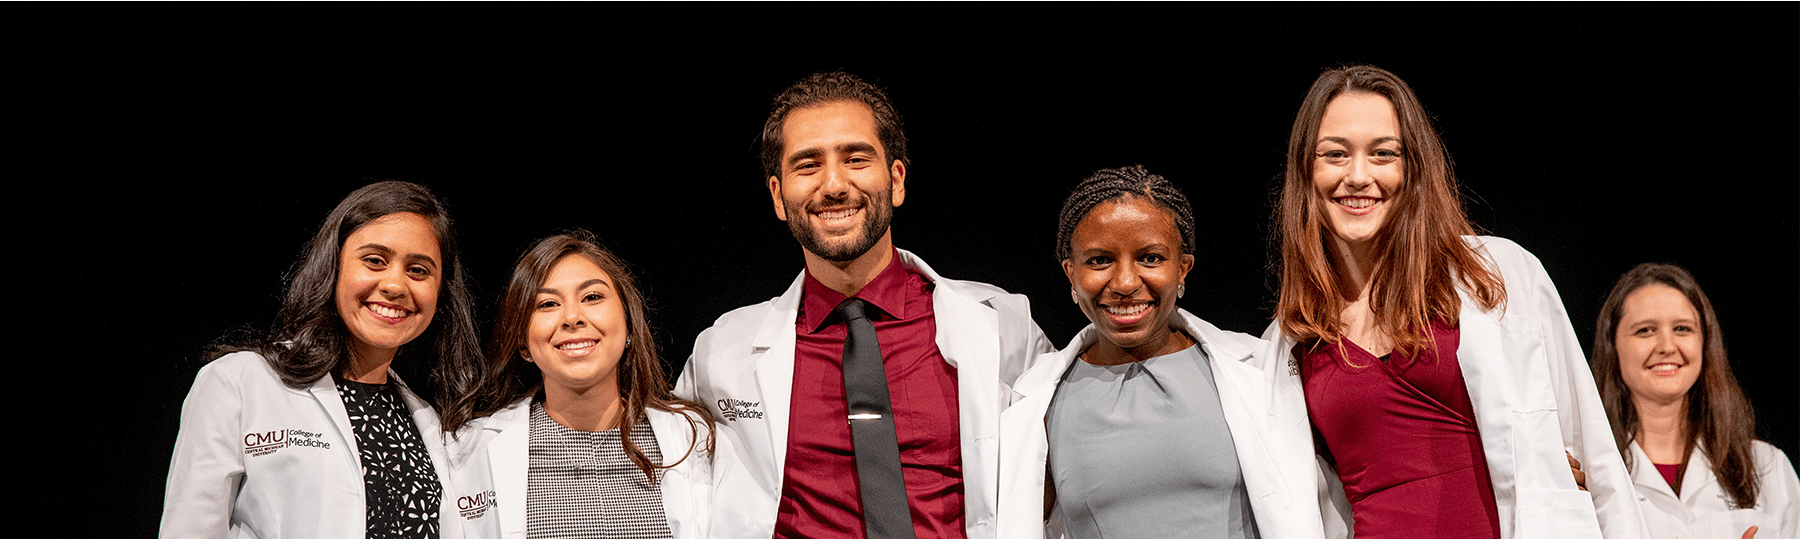 Medical students of varying genders and races standing together wearing white doctors' coats